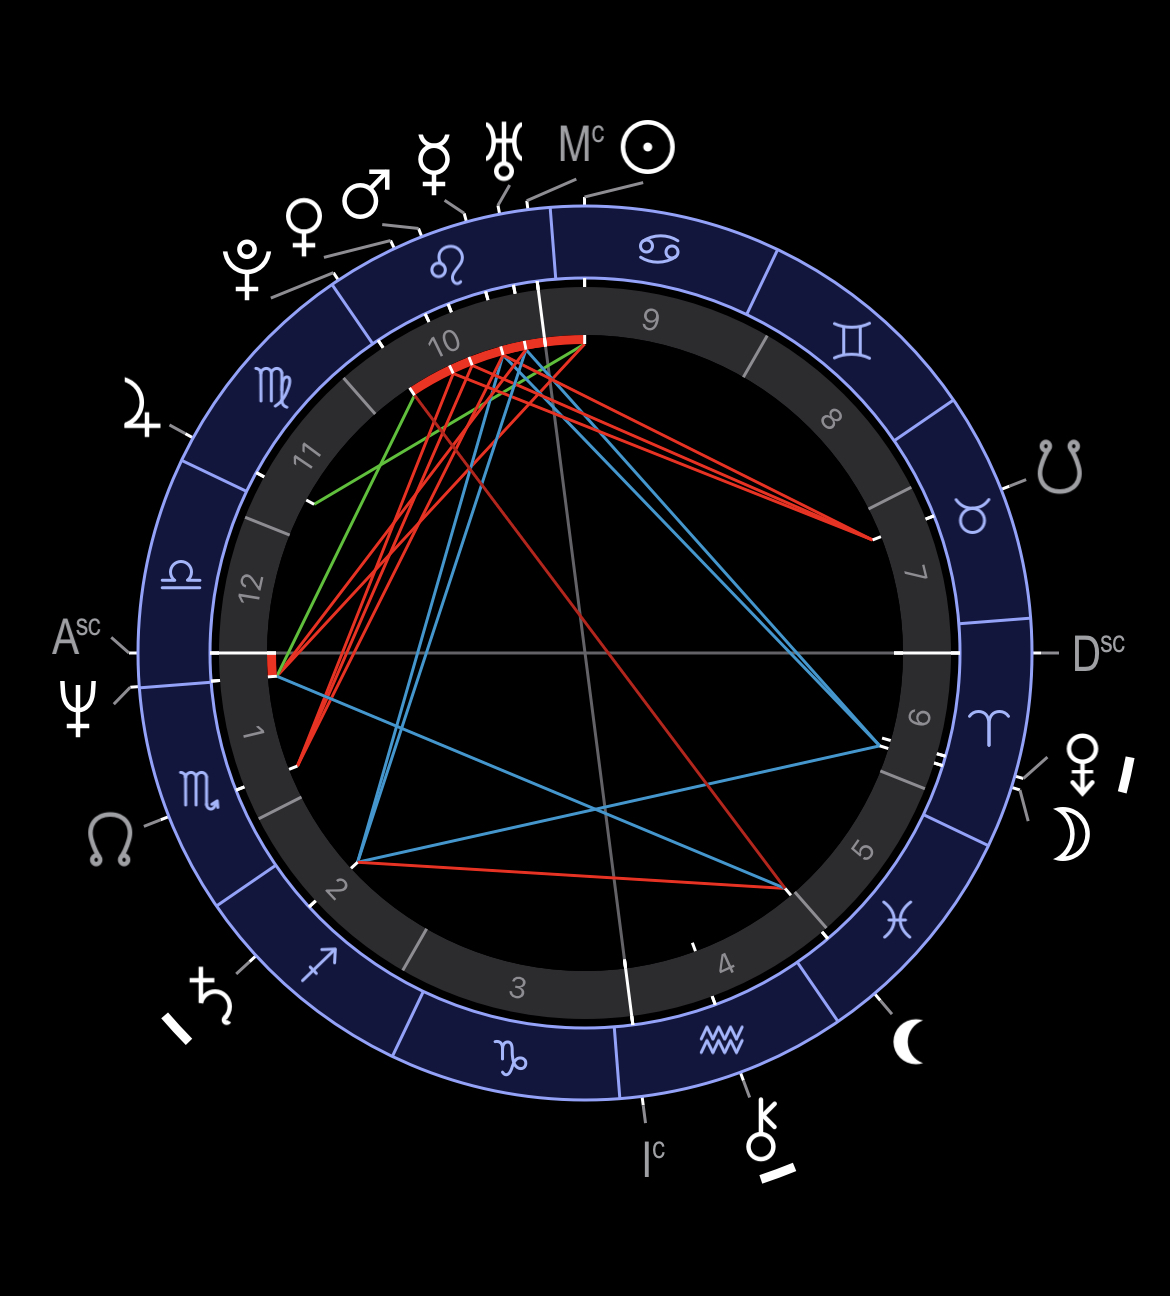 Astrological chart showing aspects, the zodiac and the houses